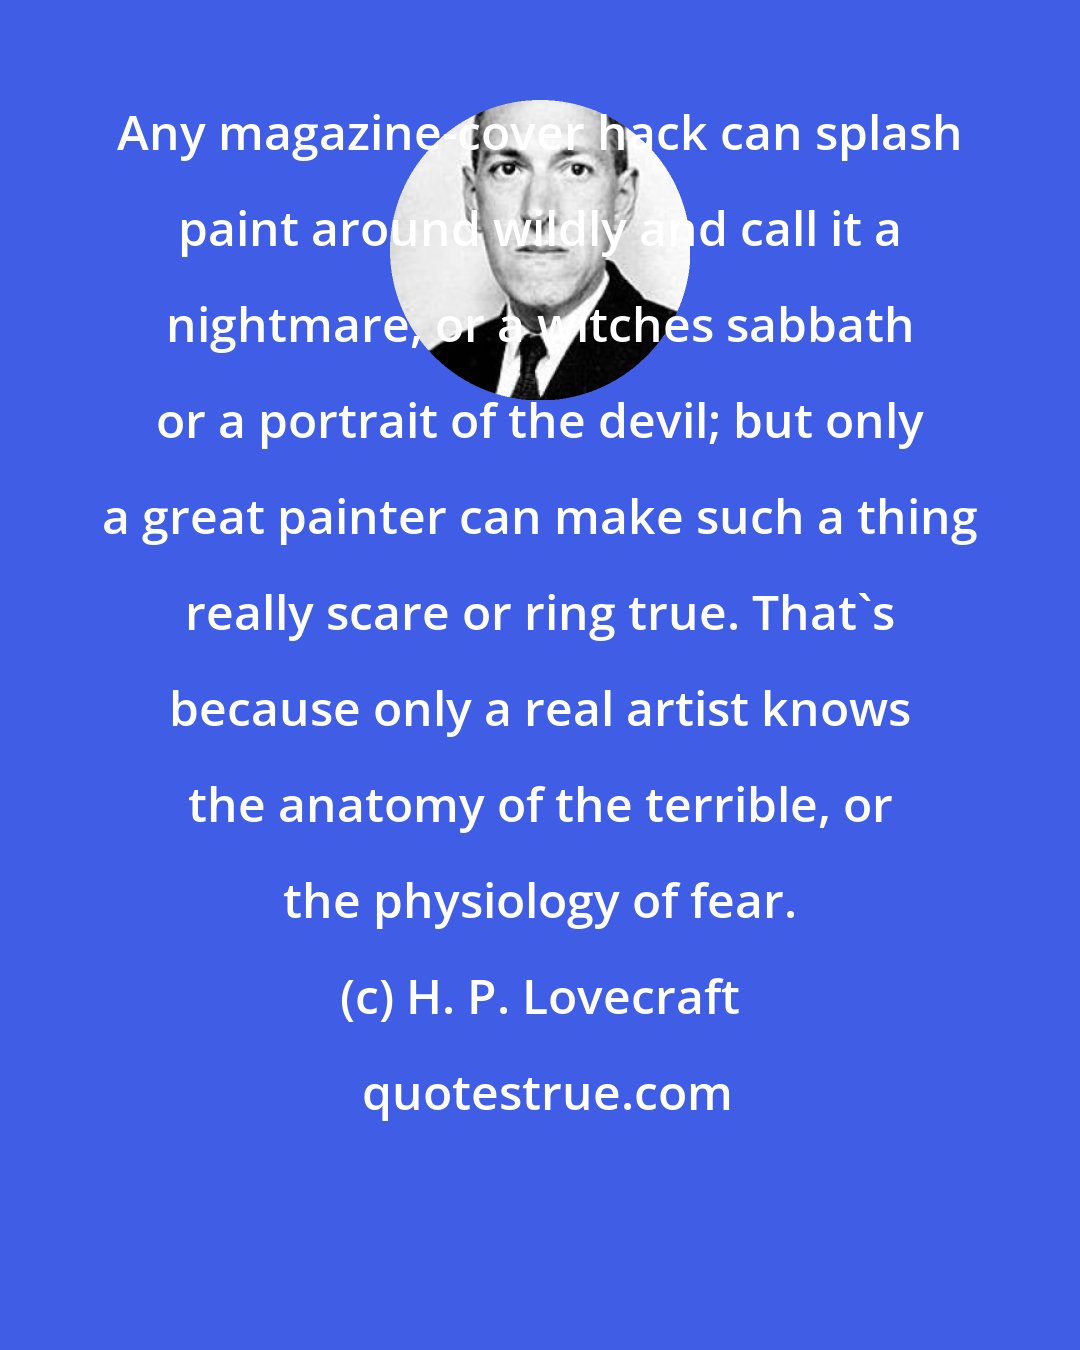 H. P. Lovecraft: Any magazine-cover hack can splash paint around wildly and call it a nightmare, or a witches sabbath or a portrait of the devil; but only a great painter can make such a thing really scare or ring true. That's because only a real artist knows the anatomy of the terrible, or the physiology of fear.